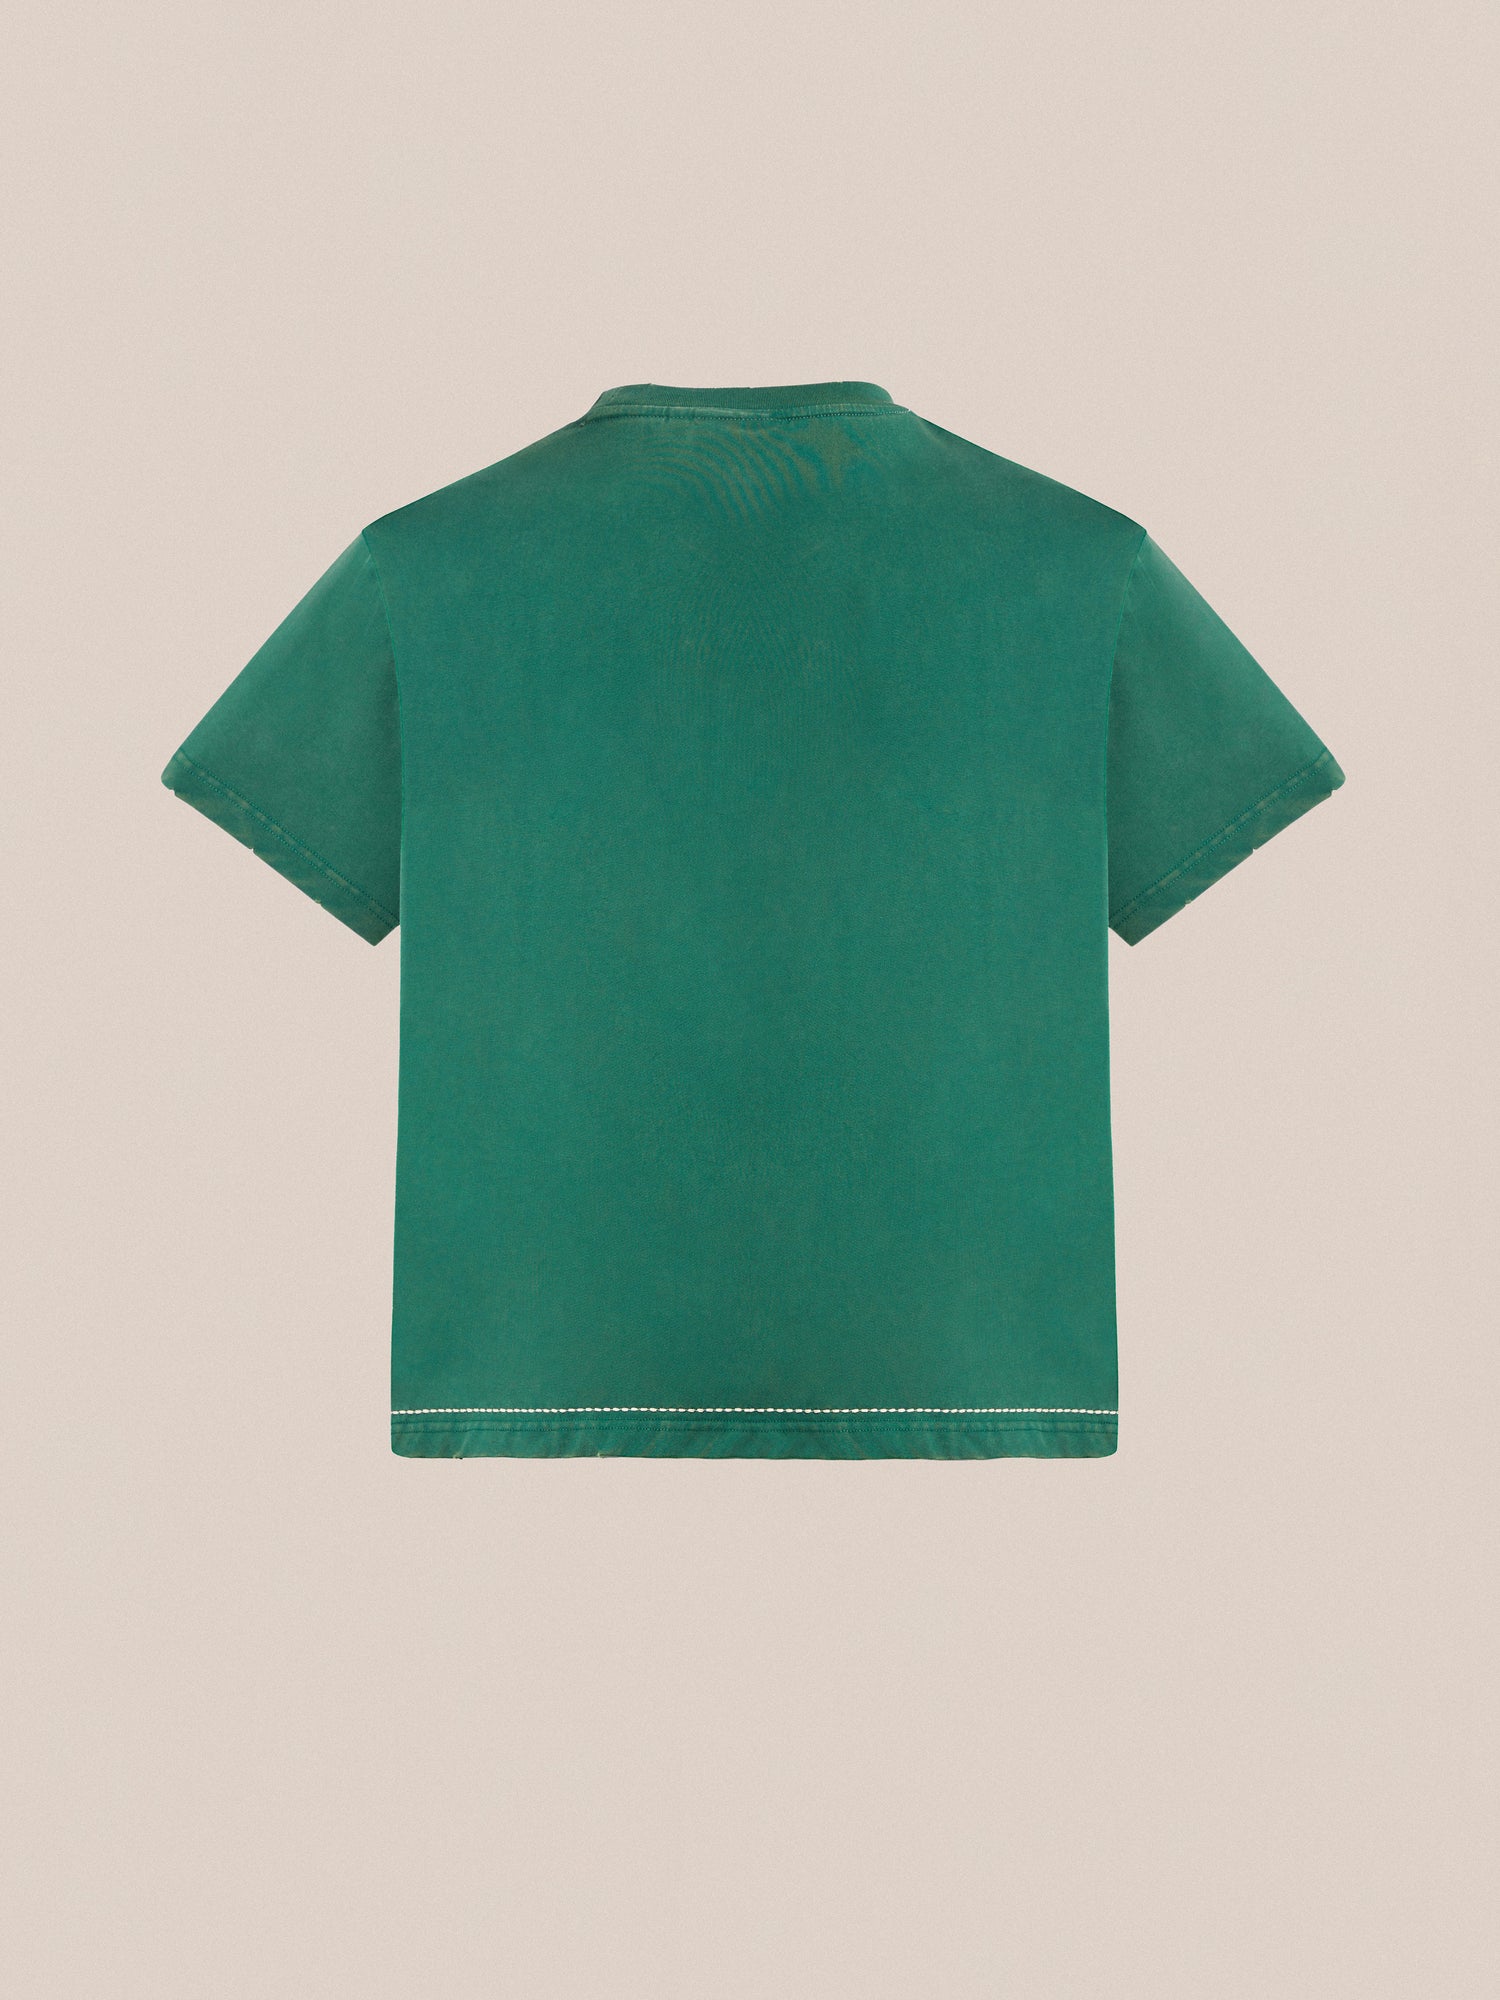 A green Found embroidered logo tee on a white background.